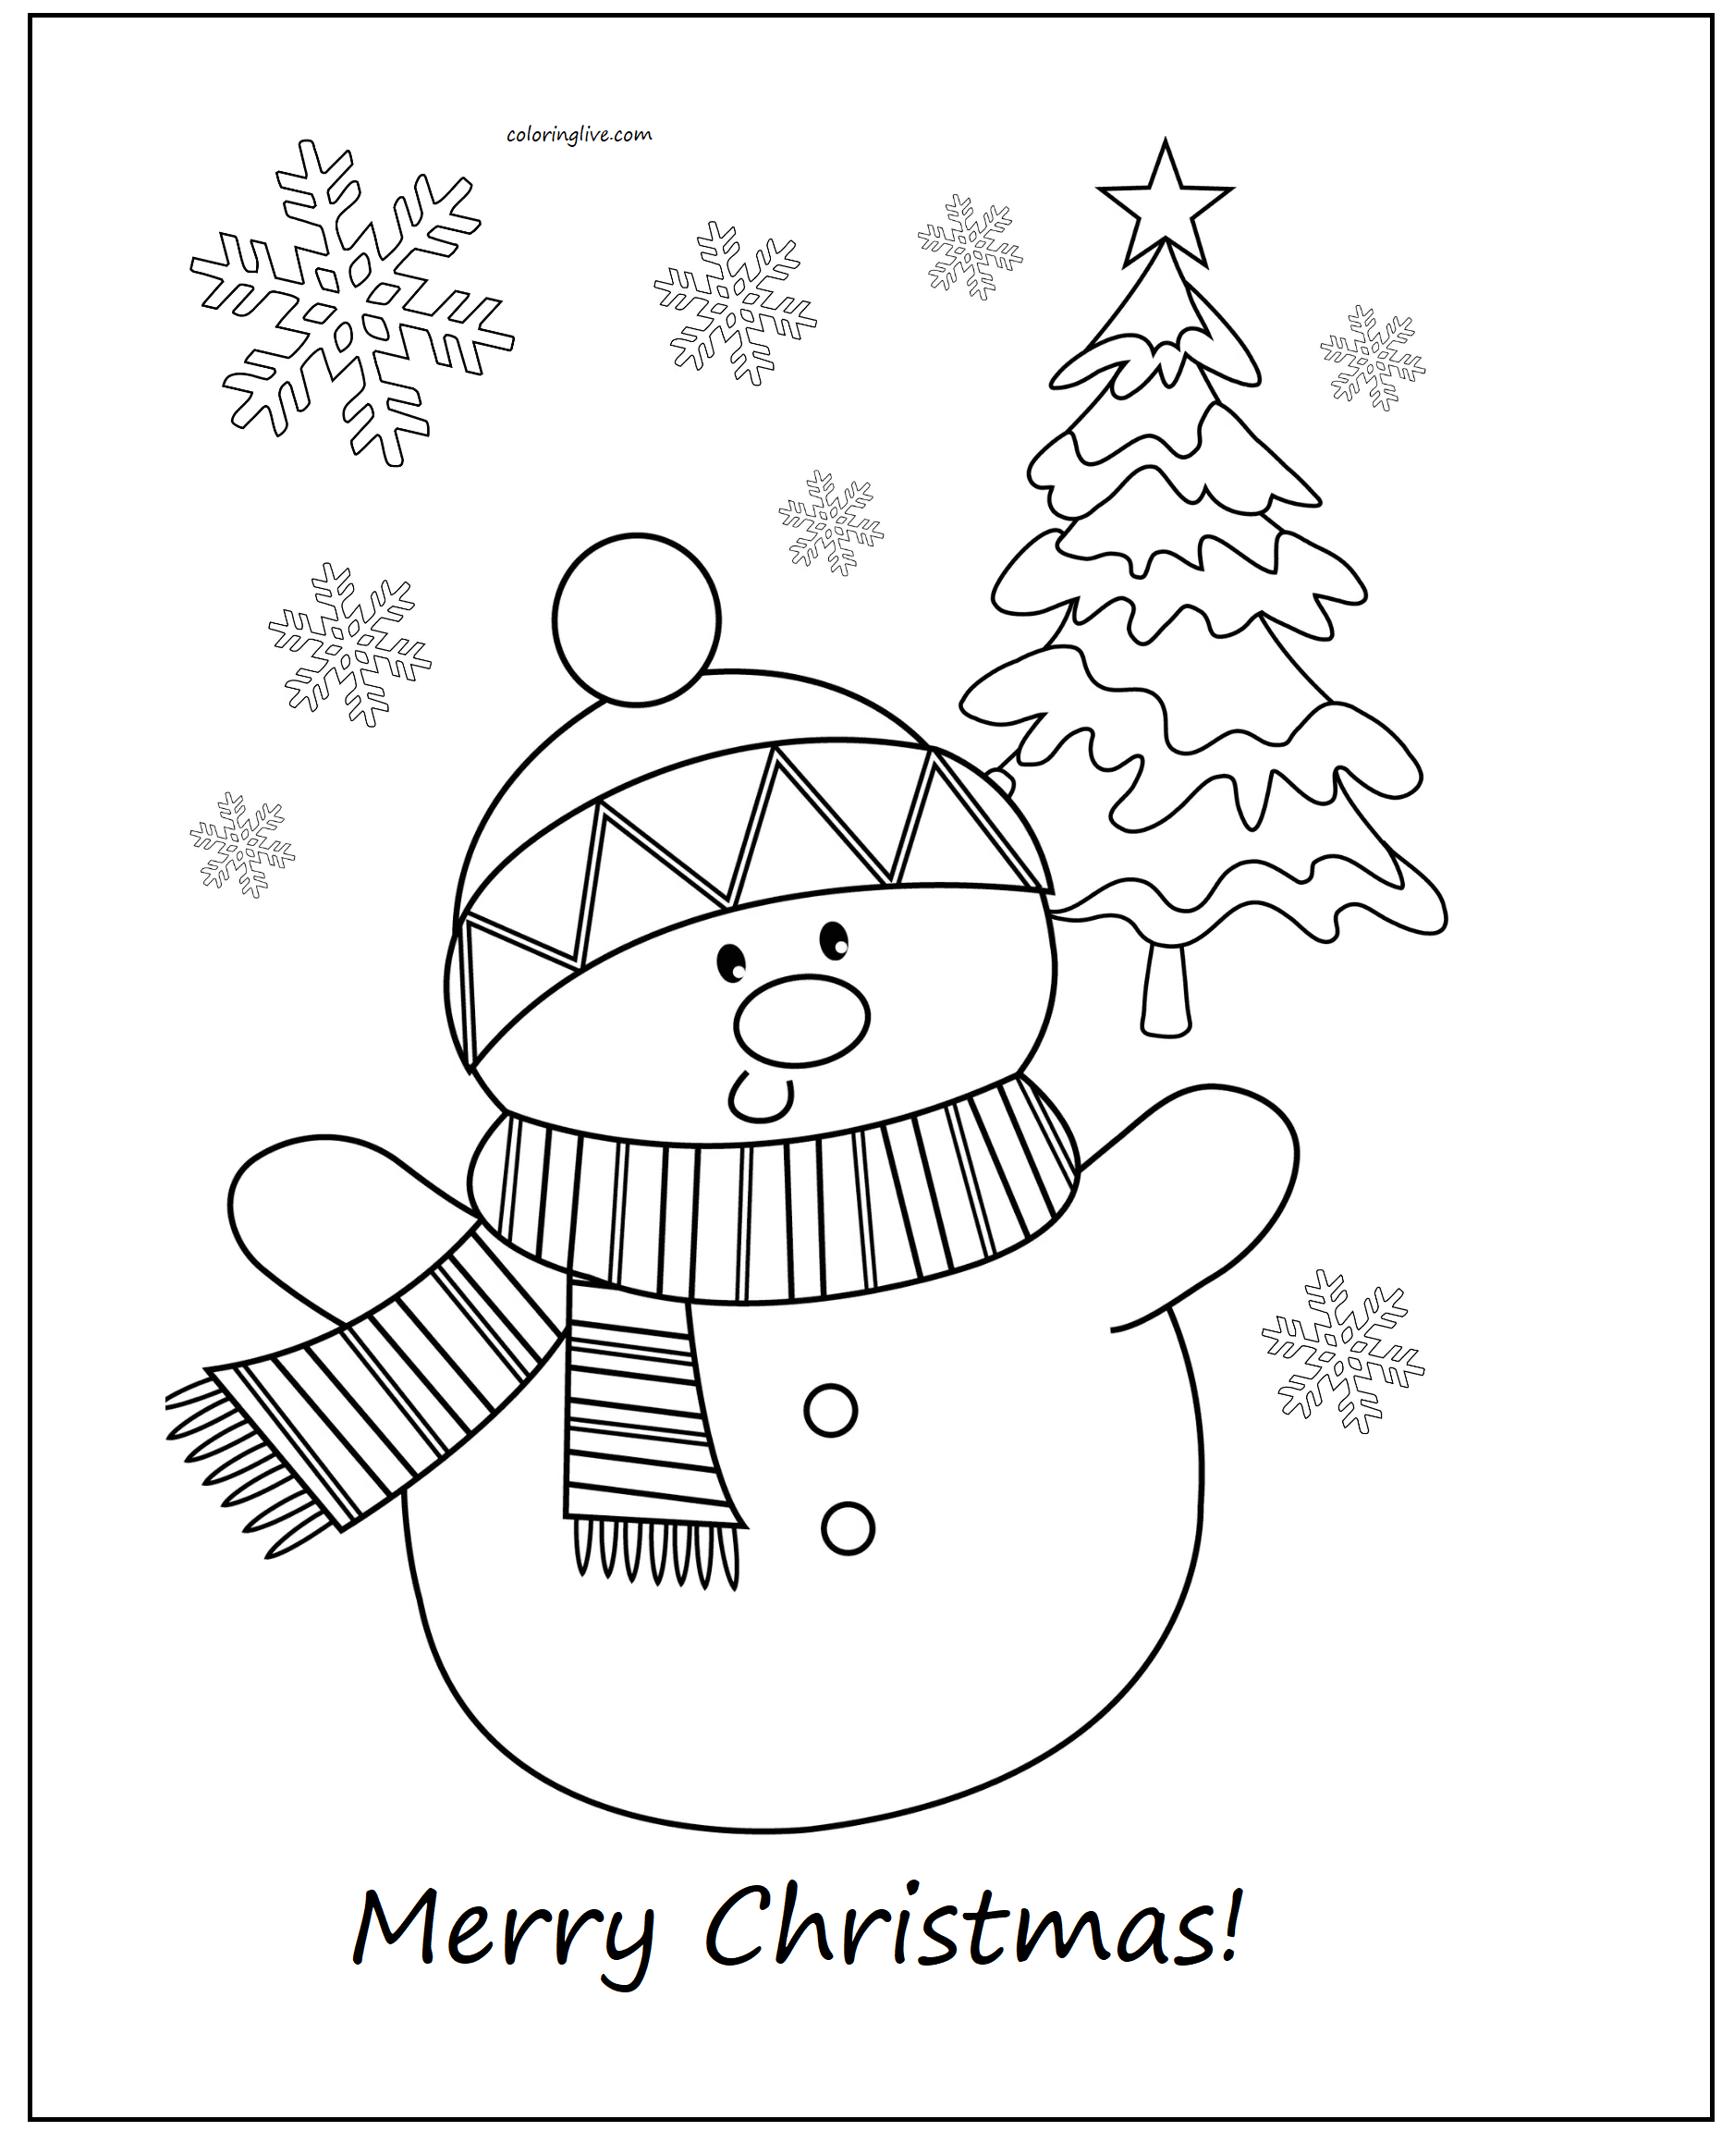 Printable Cute Christmas   5 Coloring Page for kids.